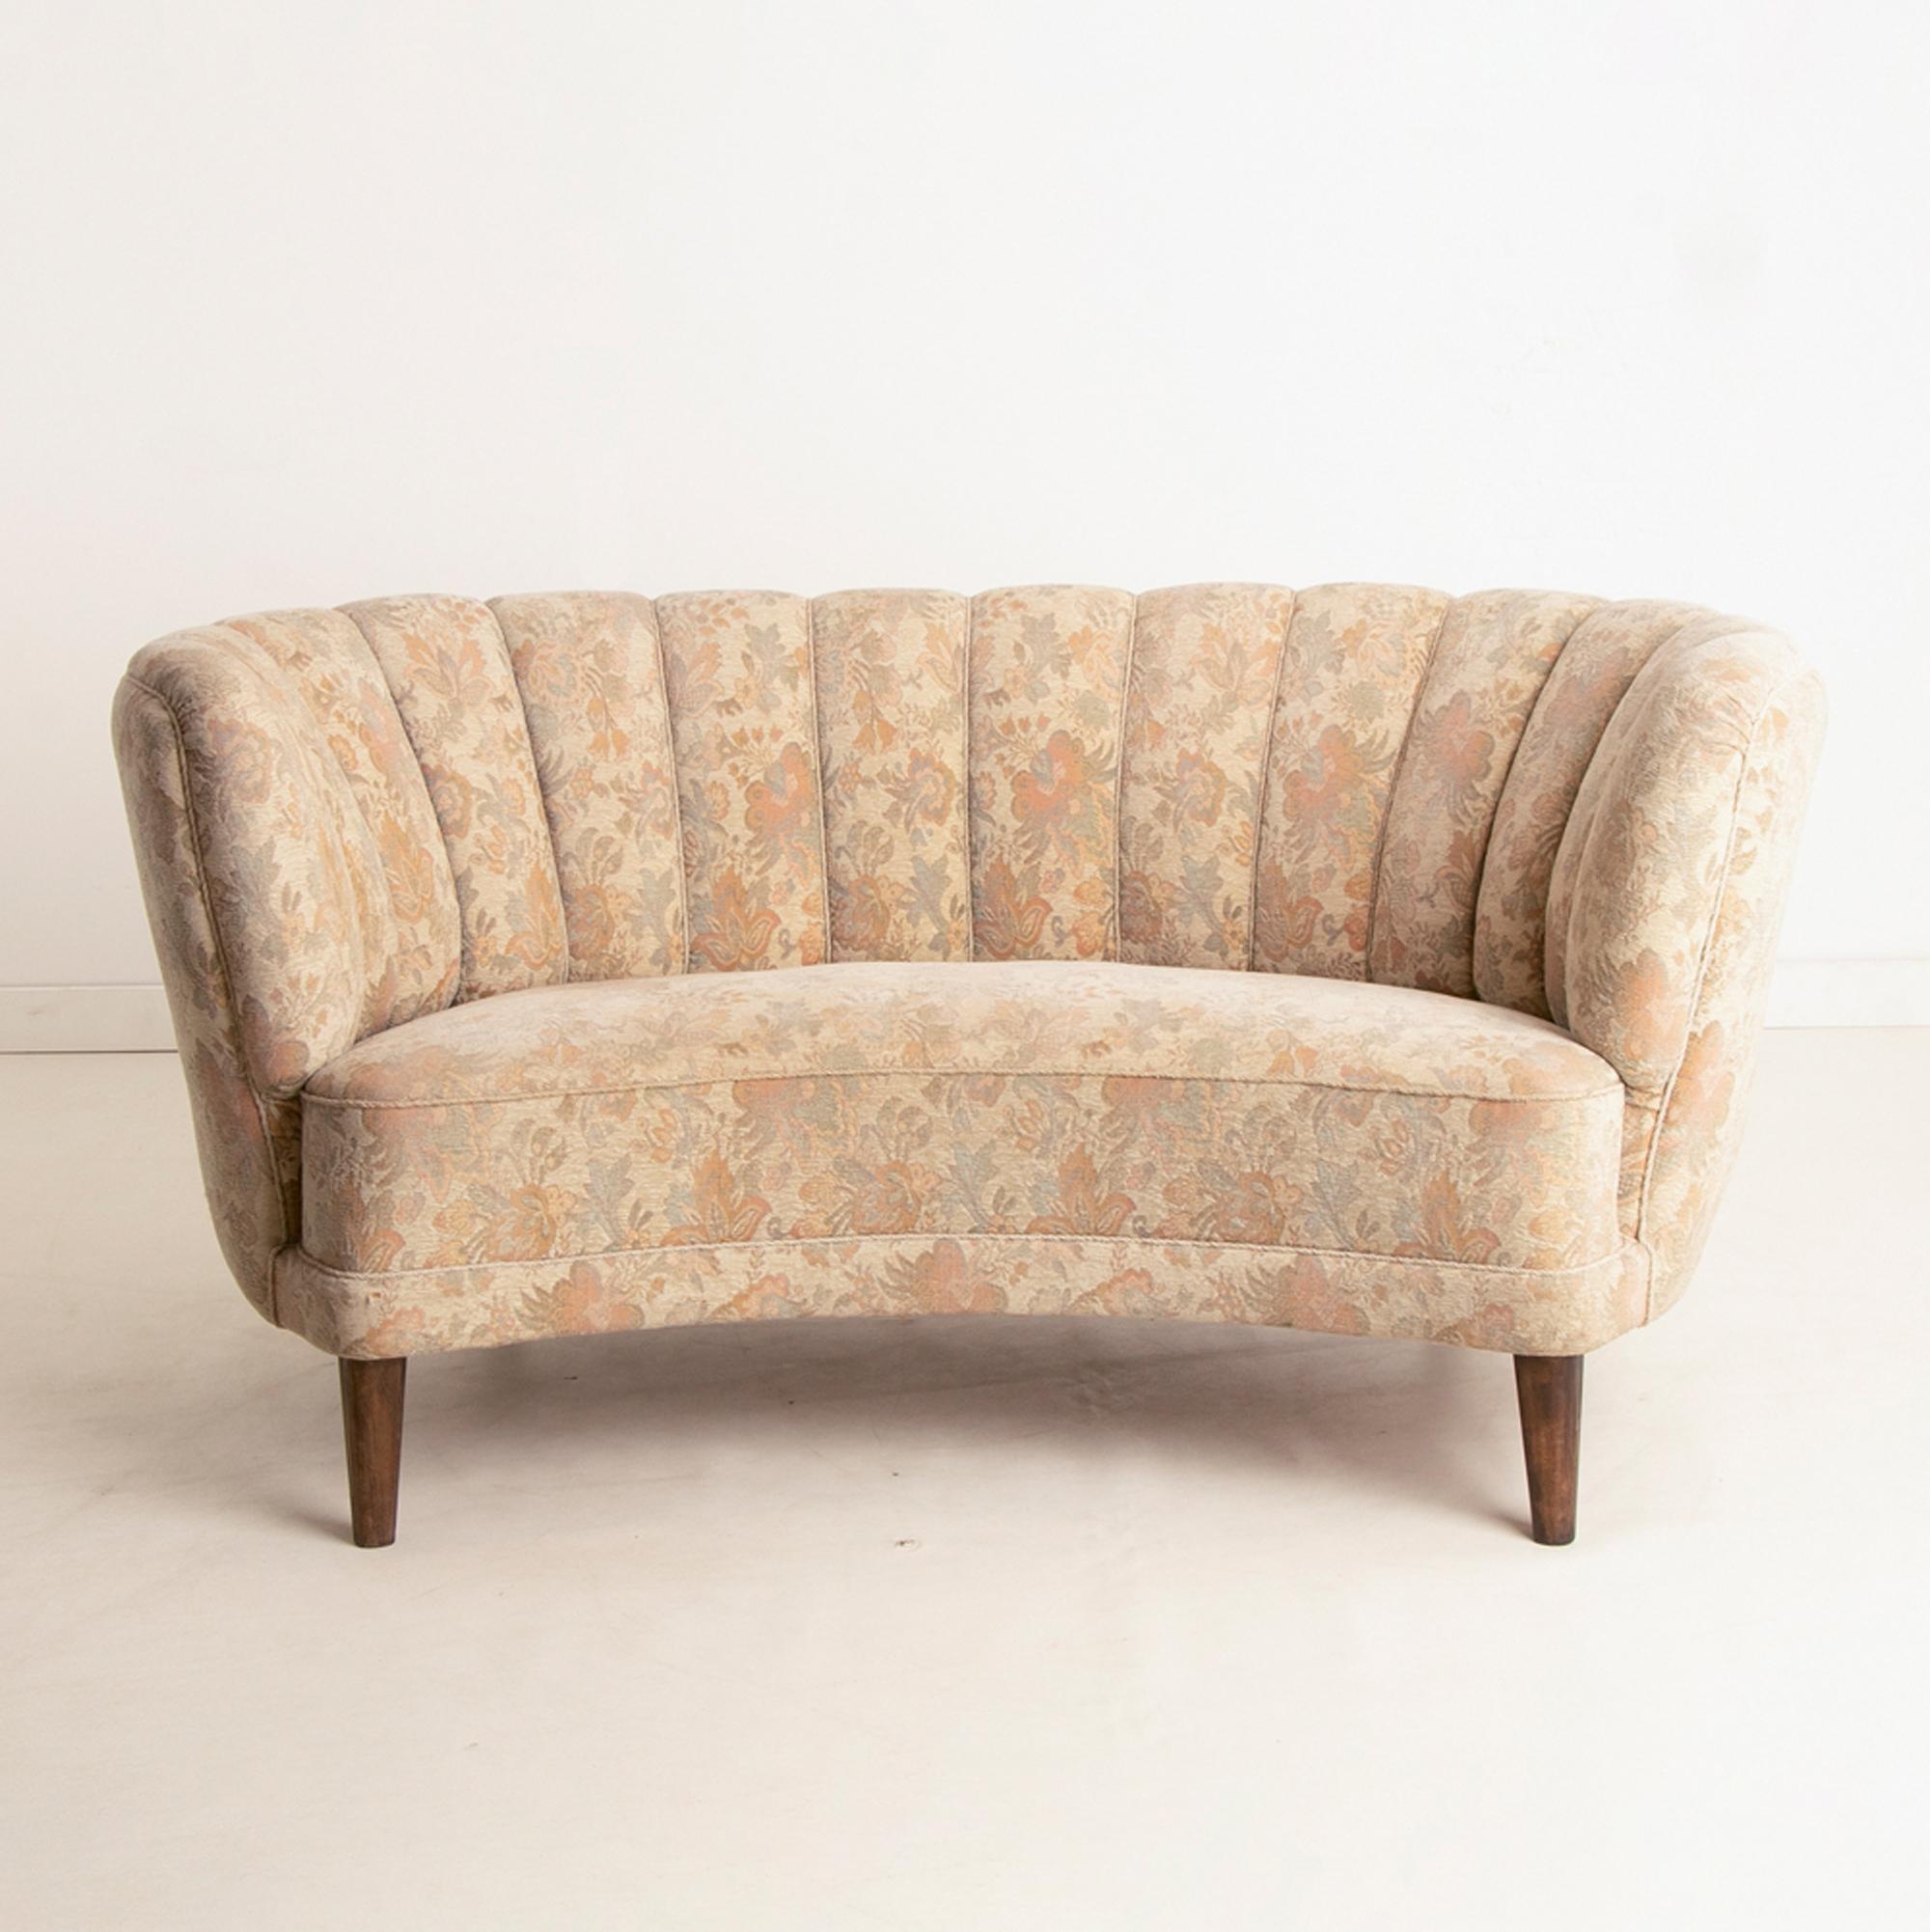 A vintage Danish banana sofa with a stylised curved back and floral upholstery.

The sofa is comfortable and home ready.